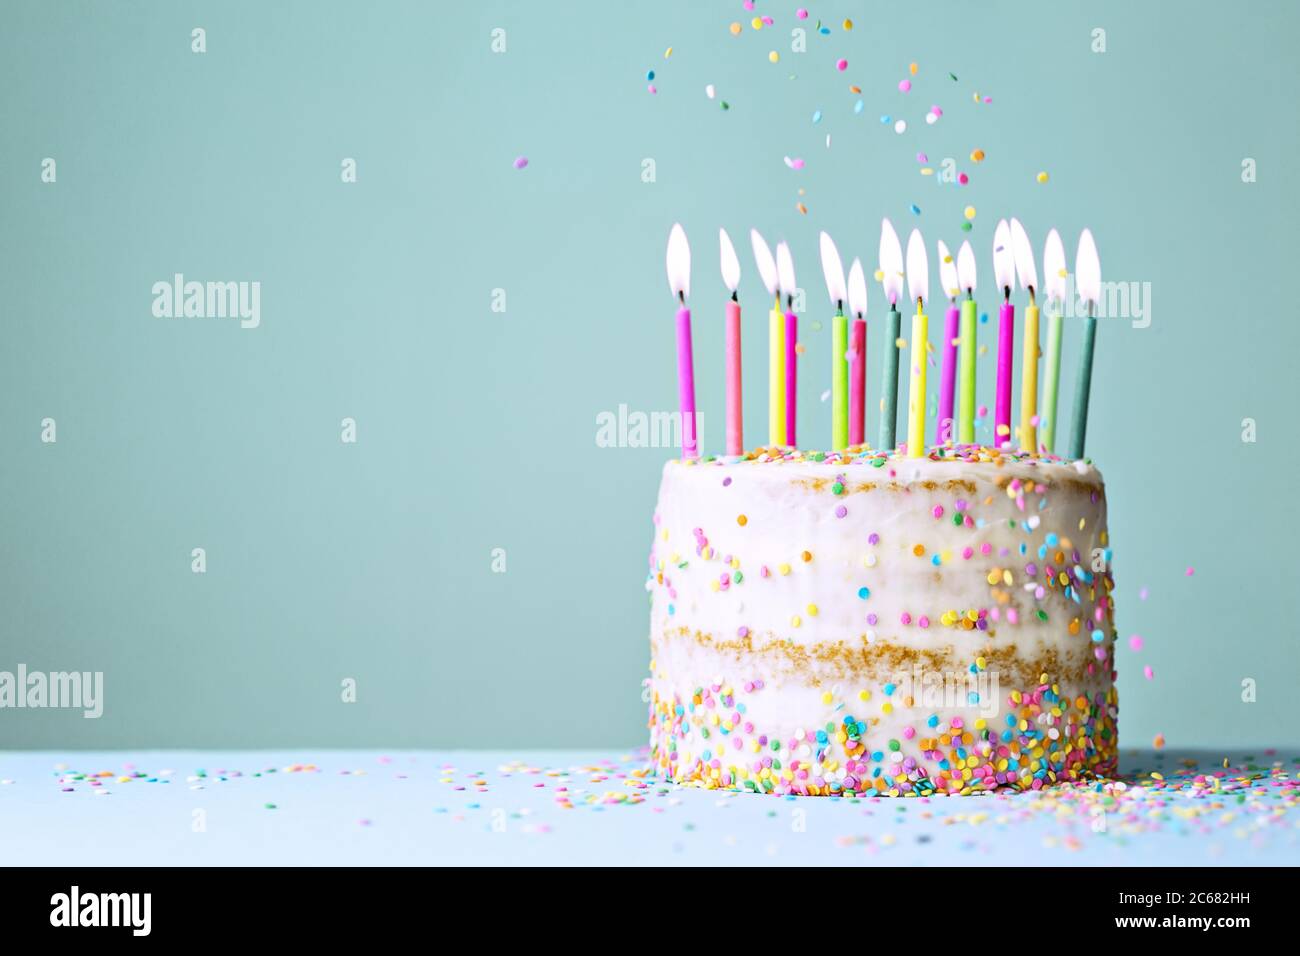 Naked funfetti birthday cake with colorful candles and falling sprinkles Stock Photo